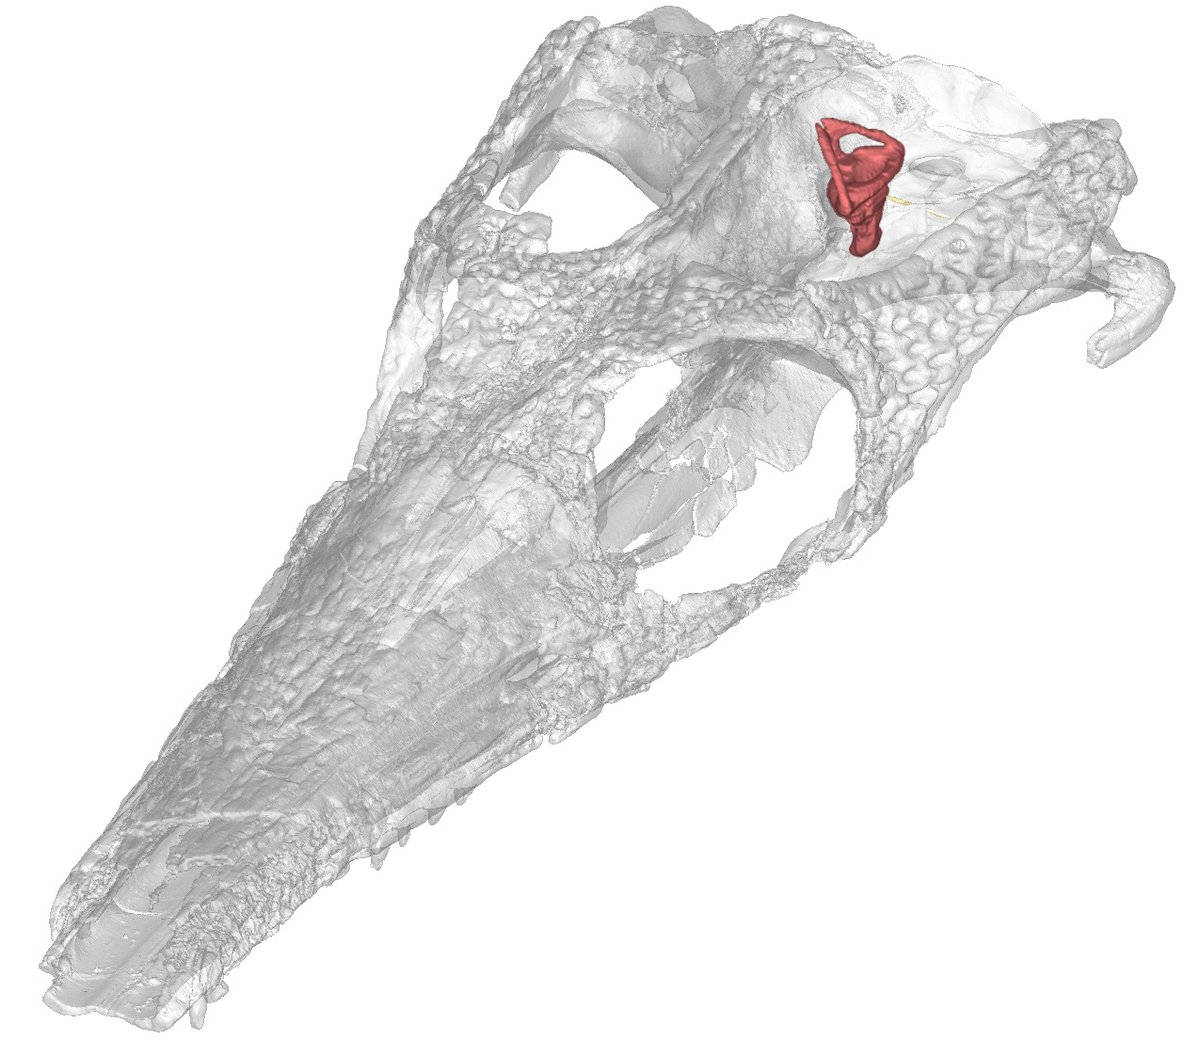 We looked at the vestibular system of the inner ear, which senses balance and equilibrium. To do so, we CAT scanned dozens of fossil and modern crocs.